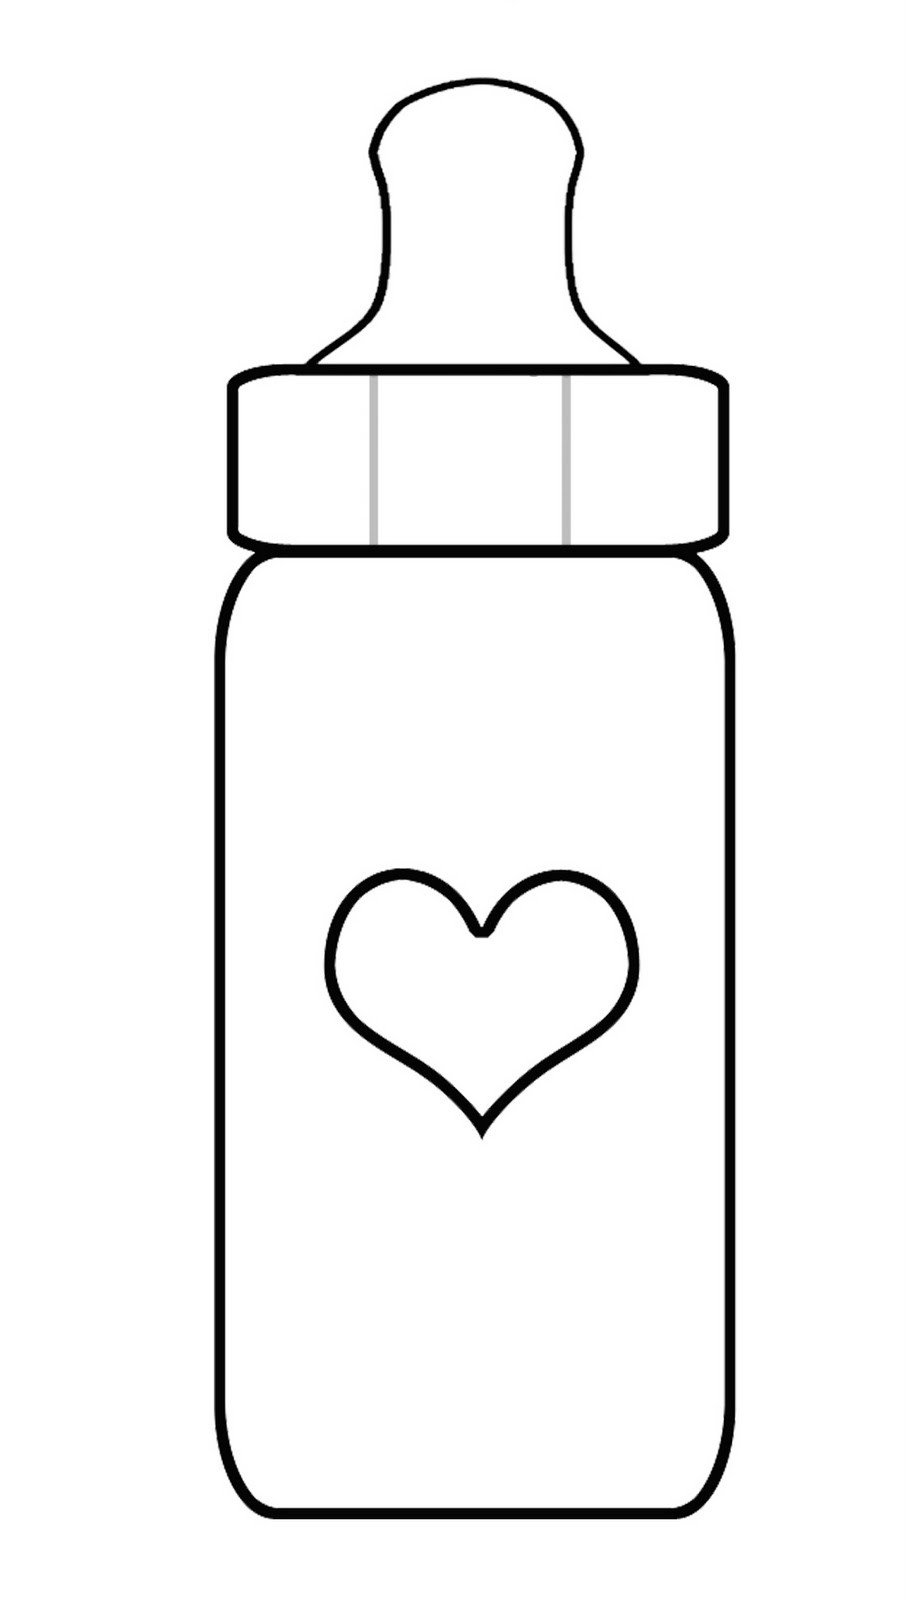 Baby Bottle Coloring Pages
 Bottle Coloring Pages